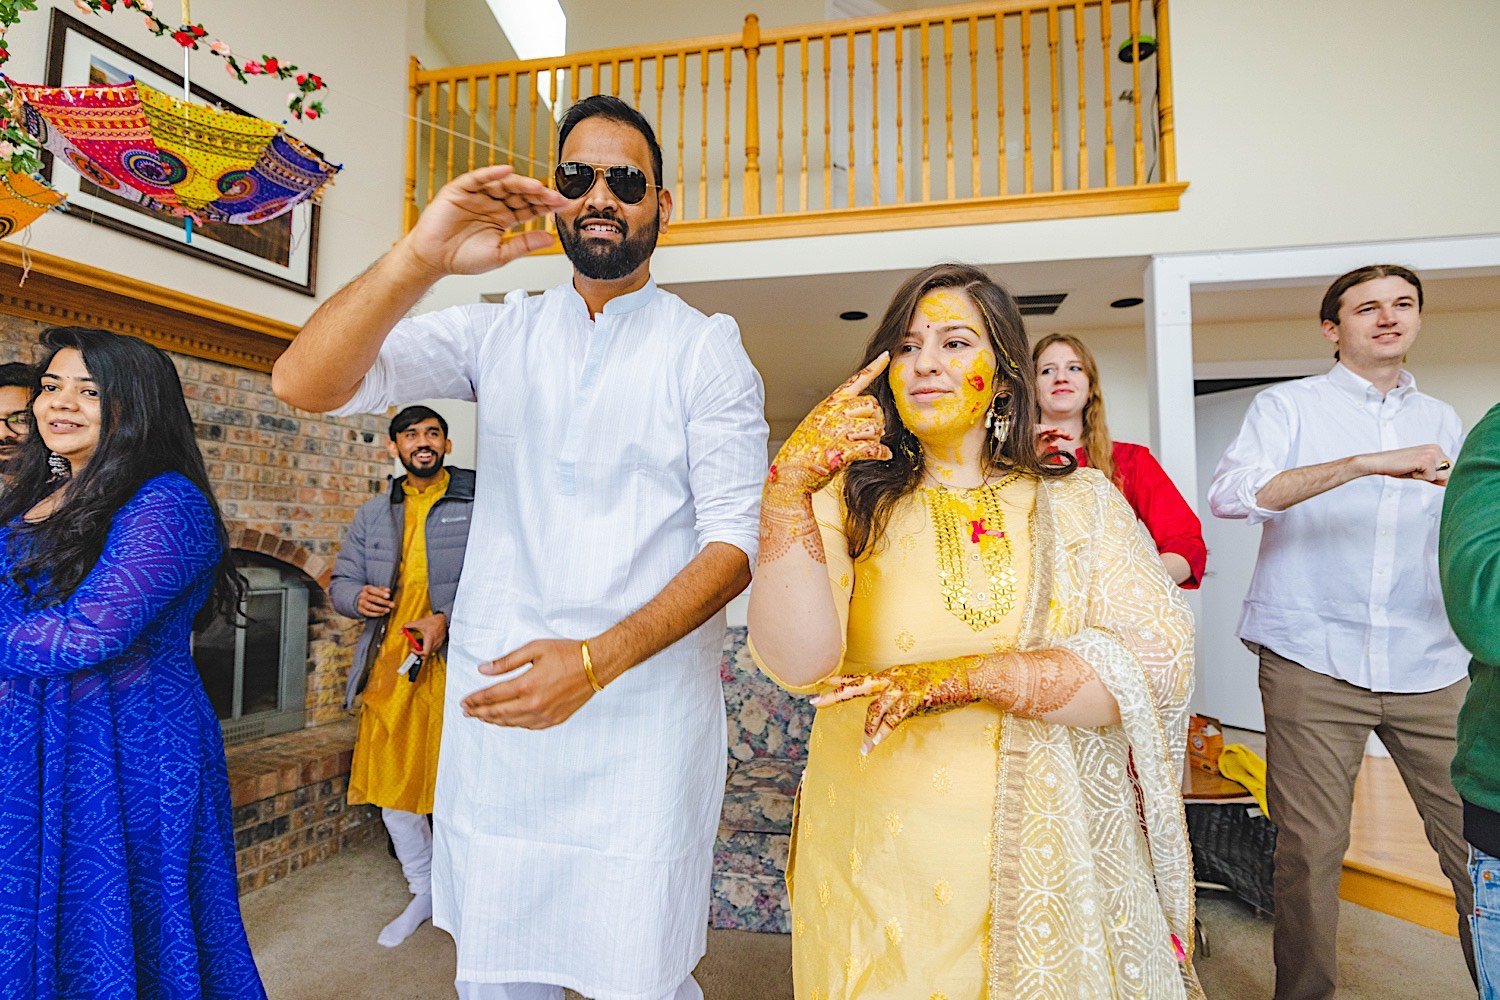 Bride, groom and wedding party all dance together at traditional Haldi celebration